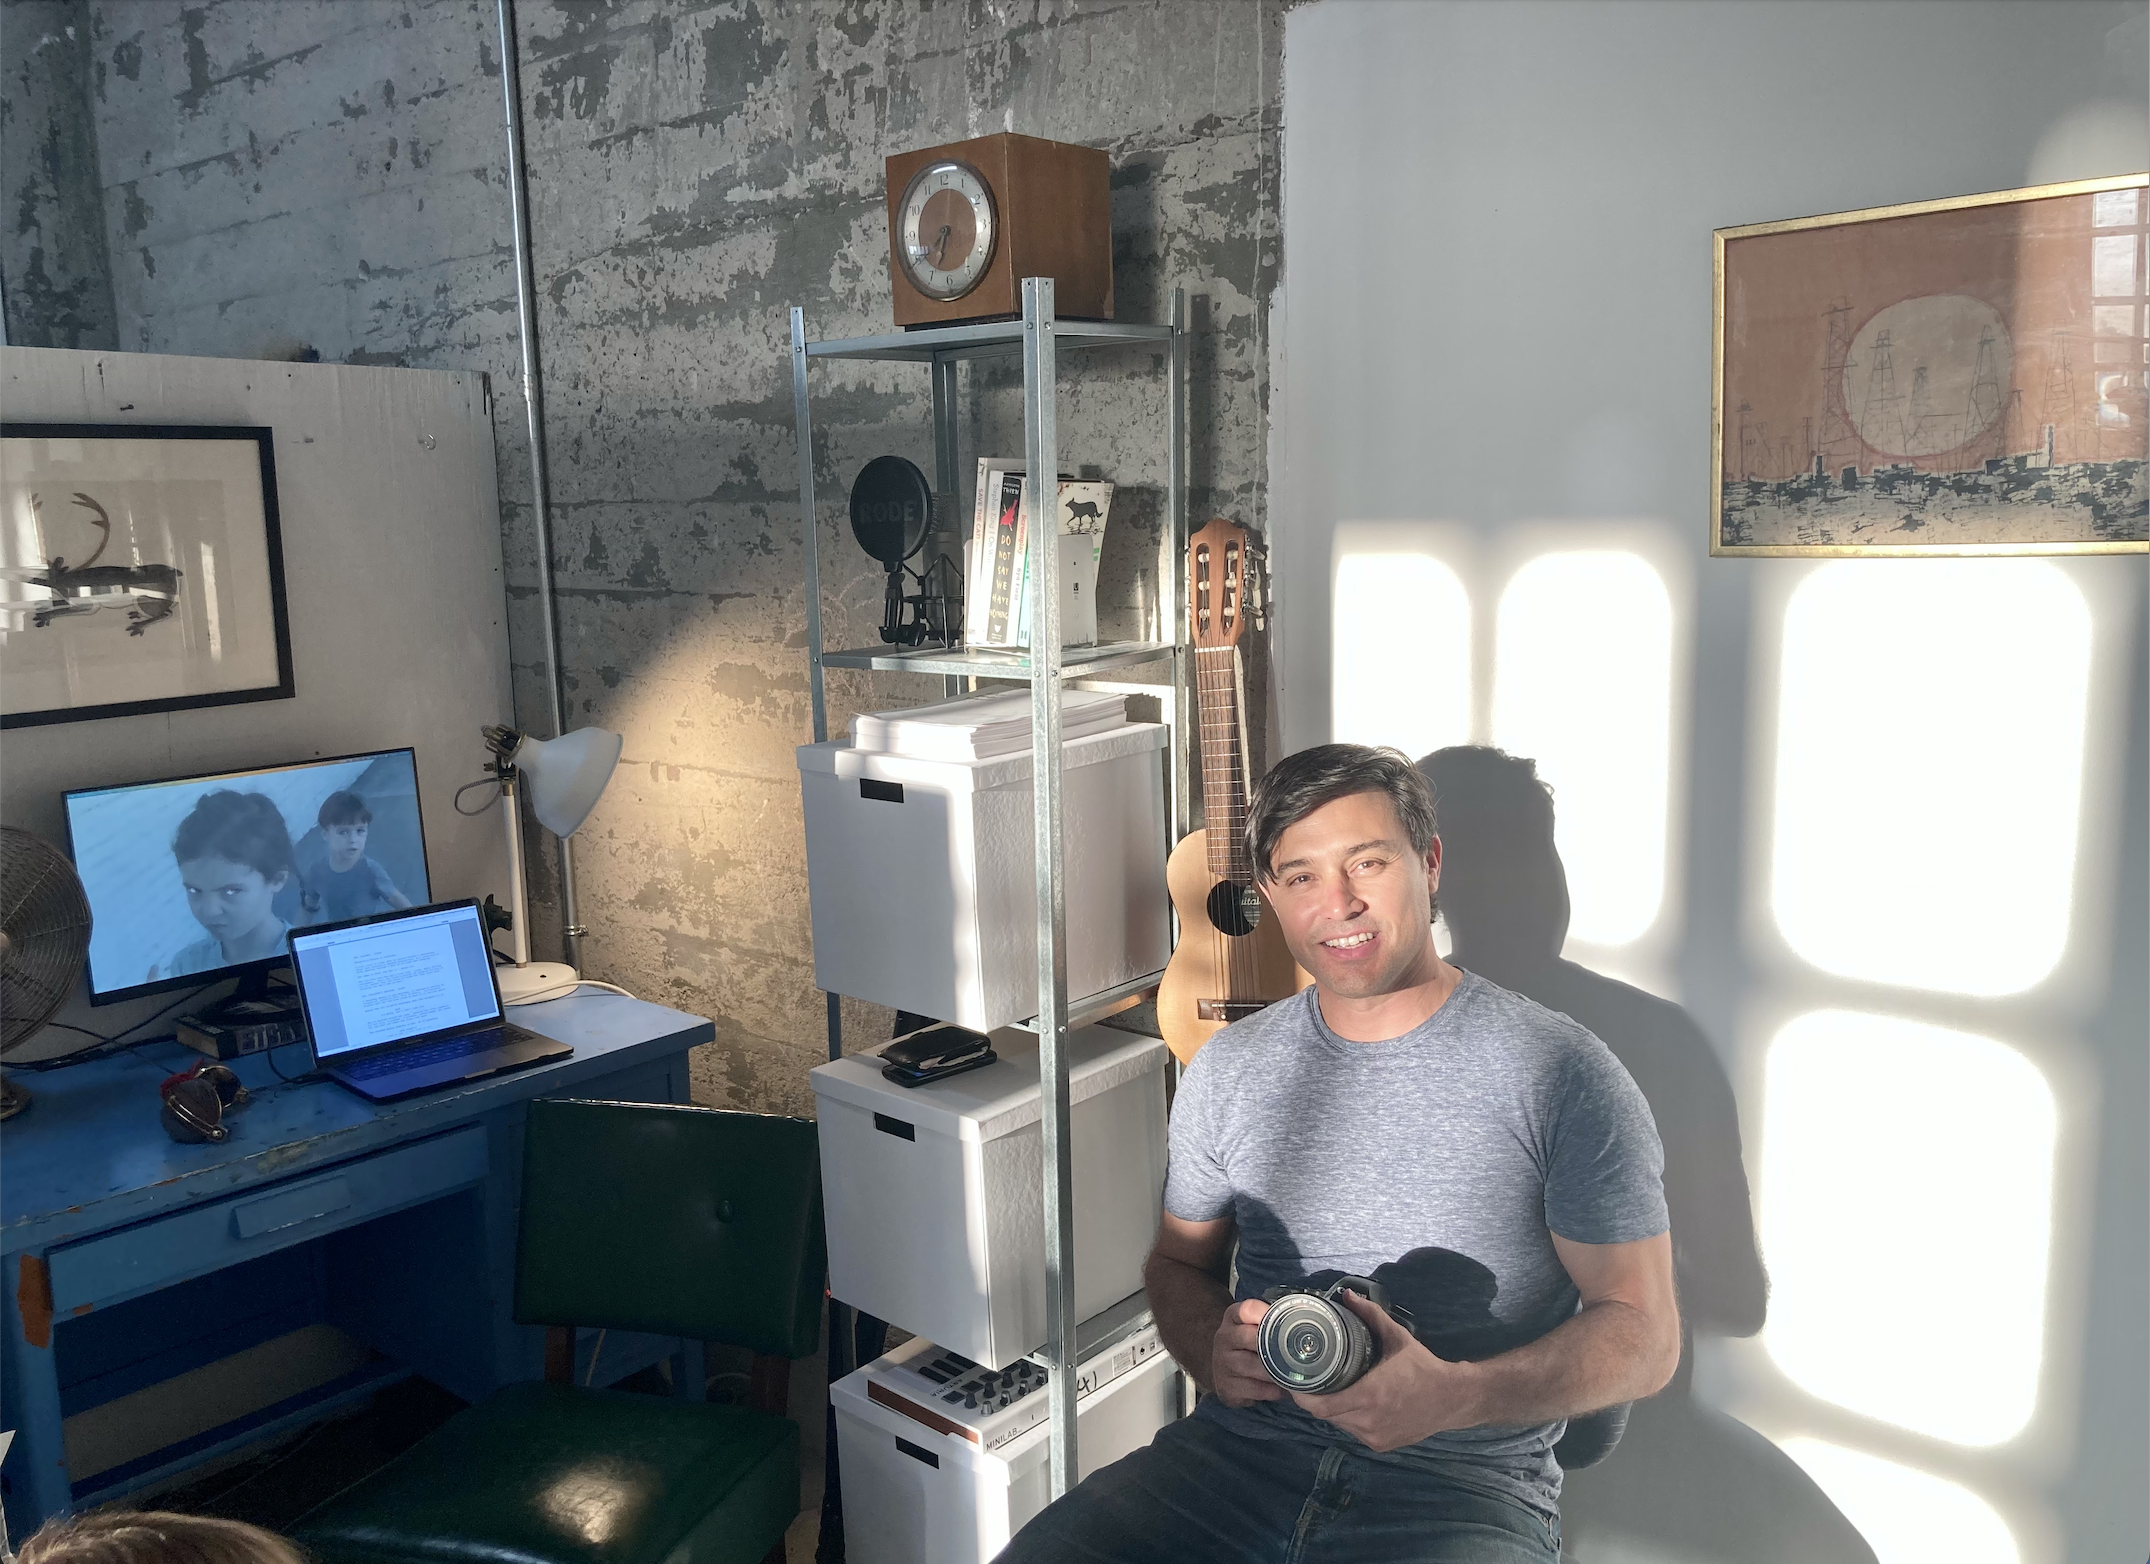   An image of Yani Gellman in his studio. He’s wearing a grey t-shirt and jeans and is holding a camera. To his left is a blue desk with two computer screens open, one to a word document, the other to a blue image of two children reminiscent of a fil